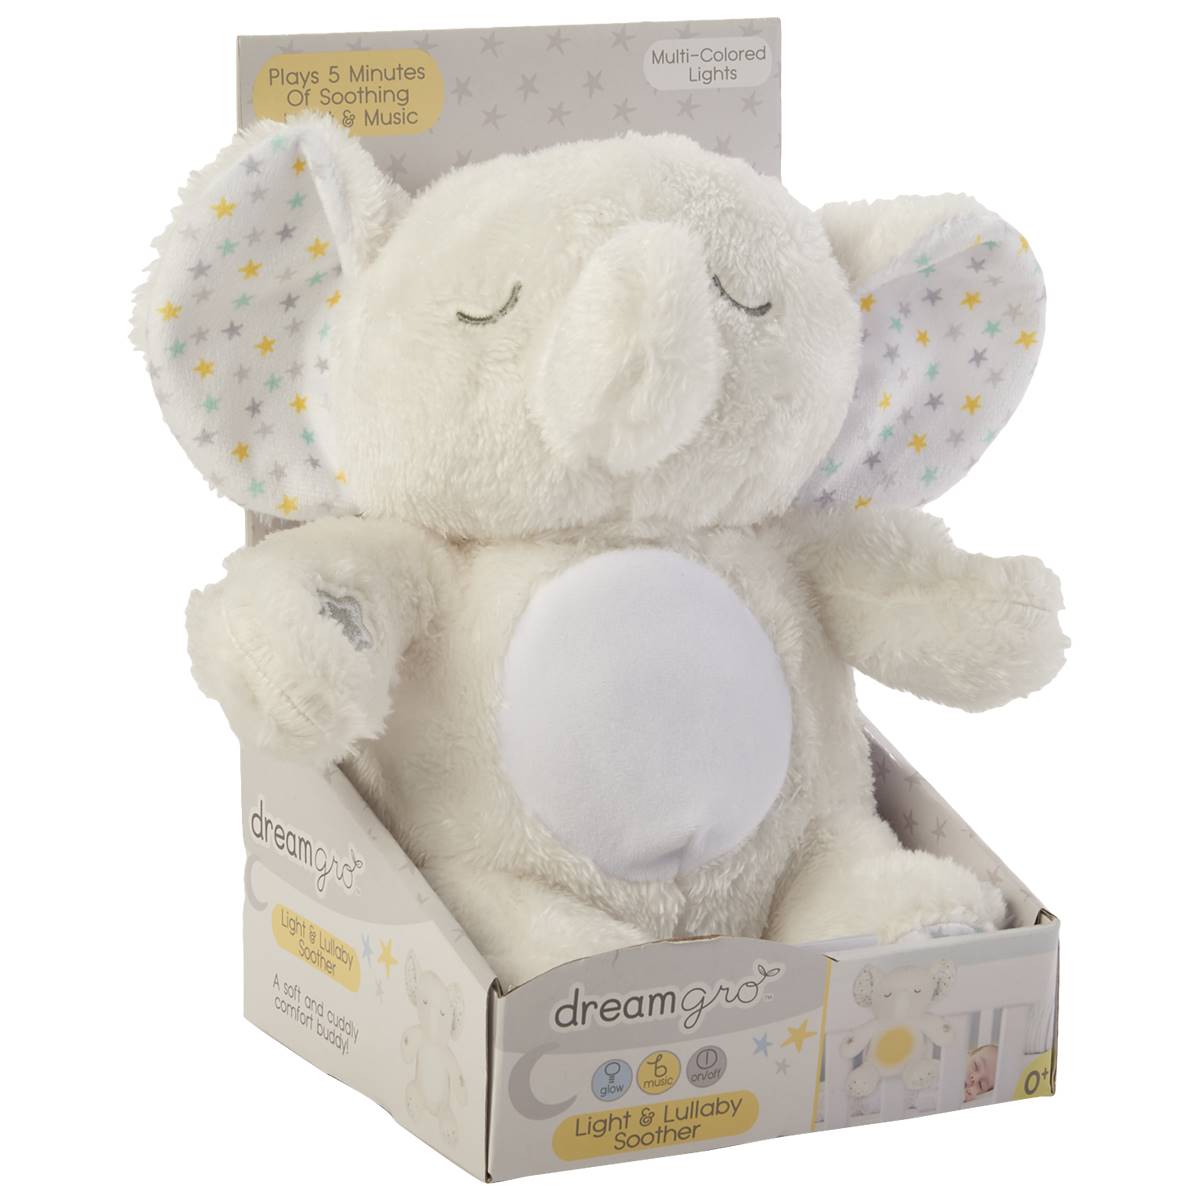 DreamGro(R) Starry Elephant Light & Lullaby Soother